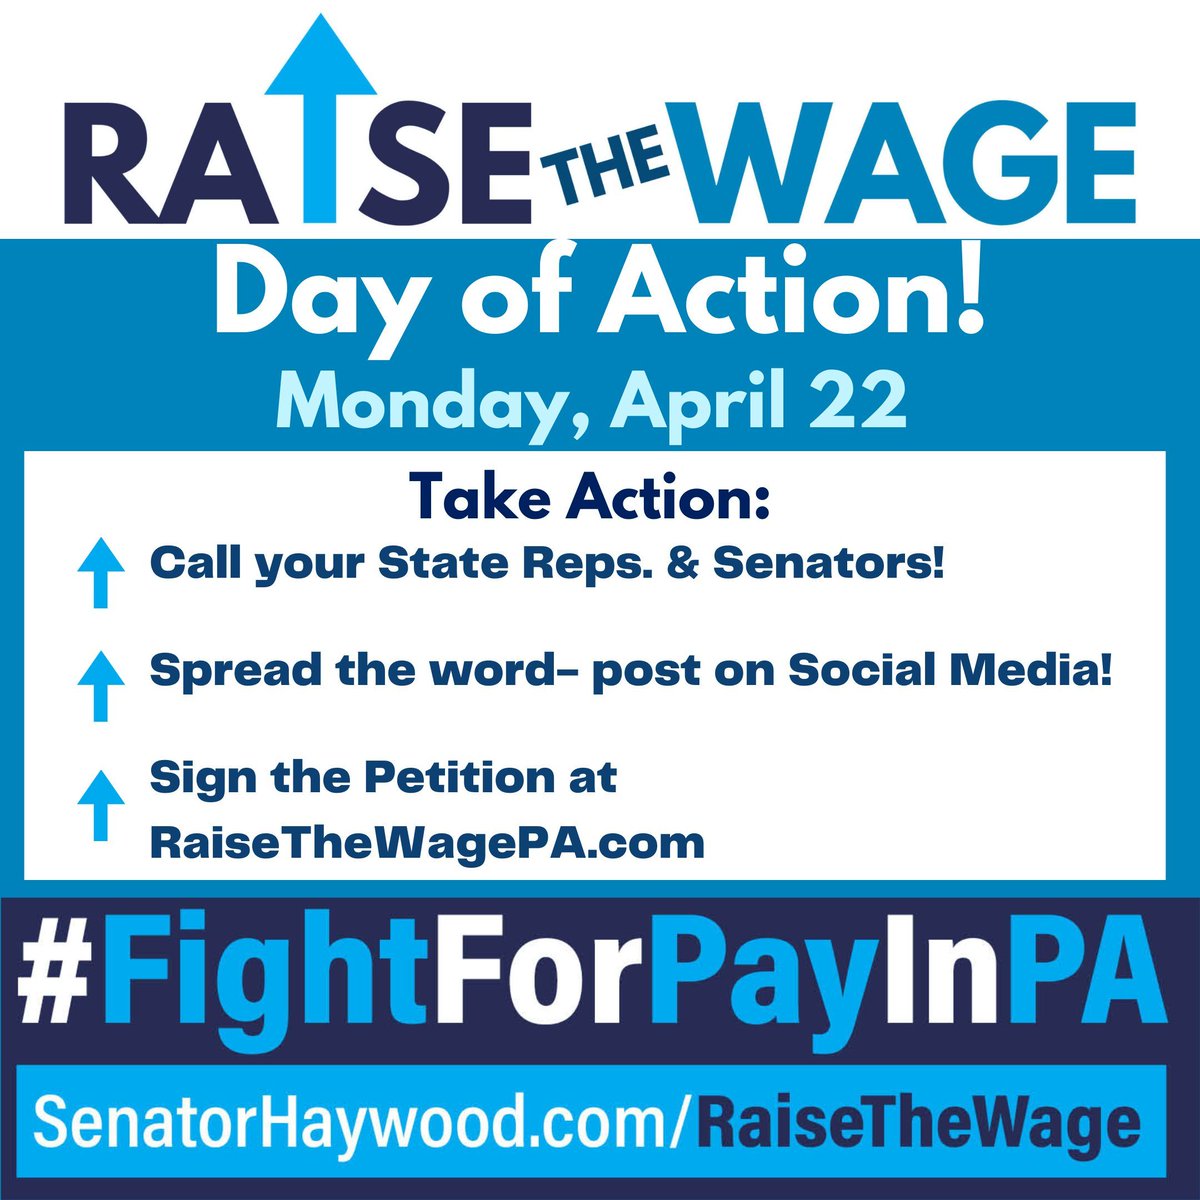 Join us on Monday's #RaiseTheWage Day of Action! Our fight continues for a living wage in PA. It's time to give Pennsylvania's workers a minimum of AT LEAST $15 per hour.